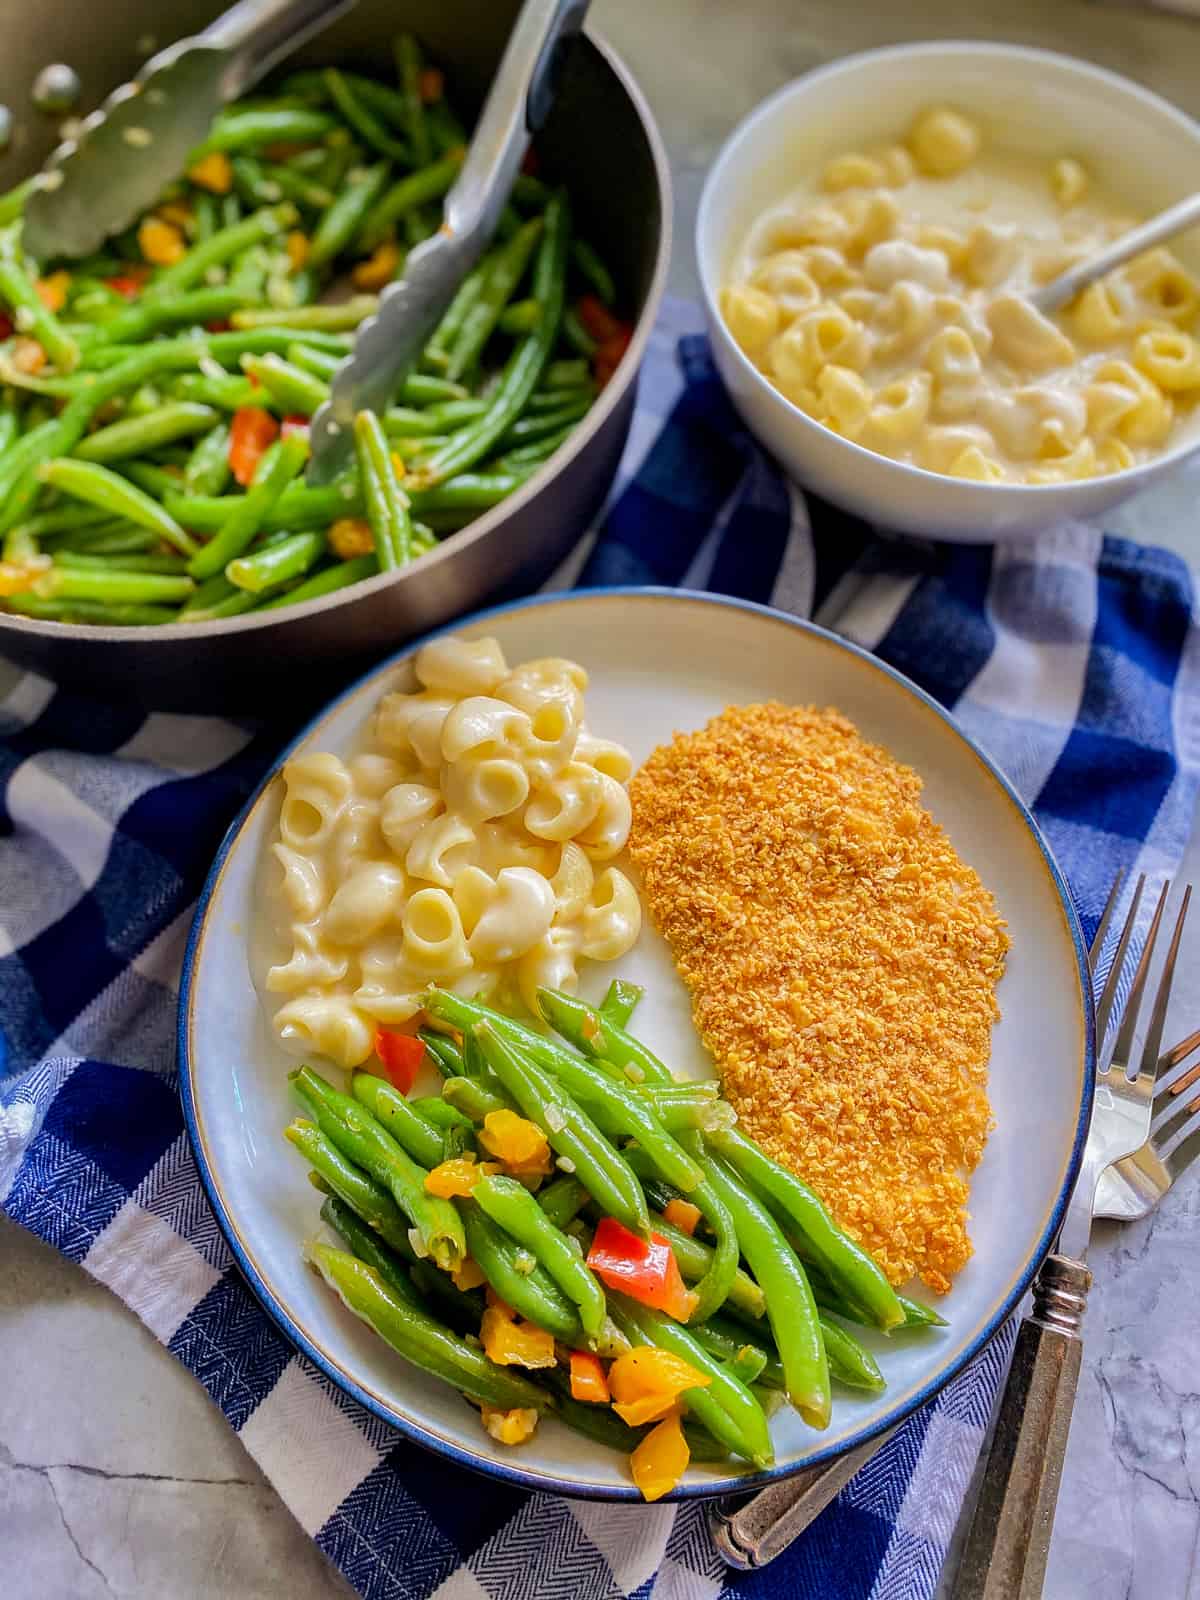 Cooked green beans served on a plate with pasta and chicken., with more green beans and pasta in the background.